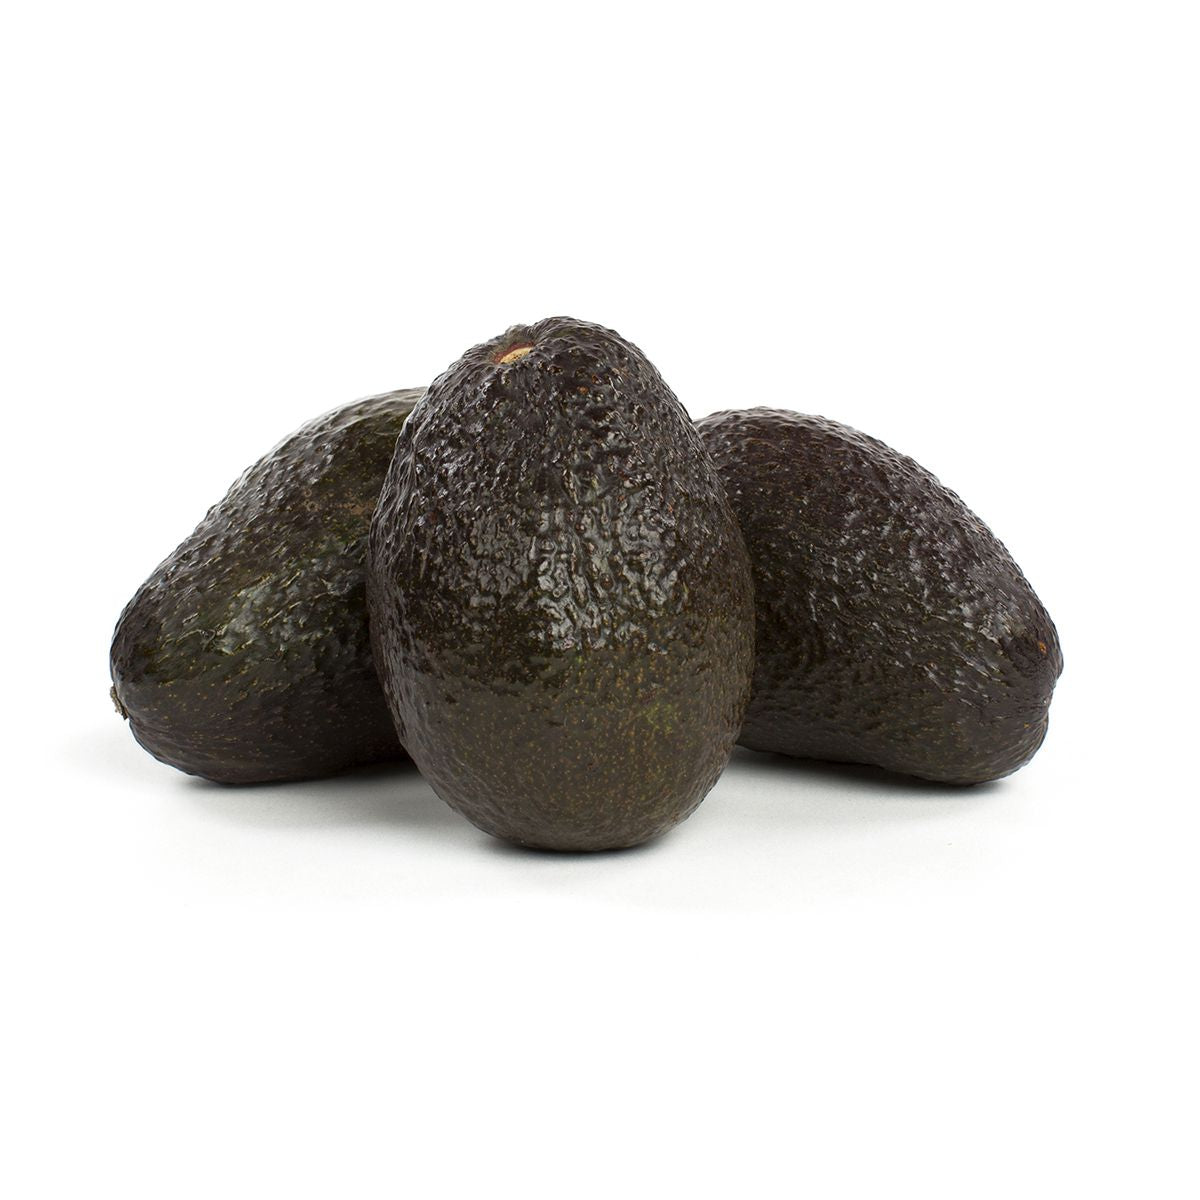 Avocados From Mexico Organic Firm Hass Avocados 48 ct